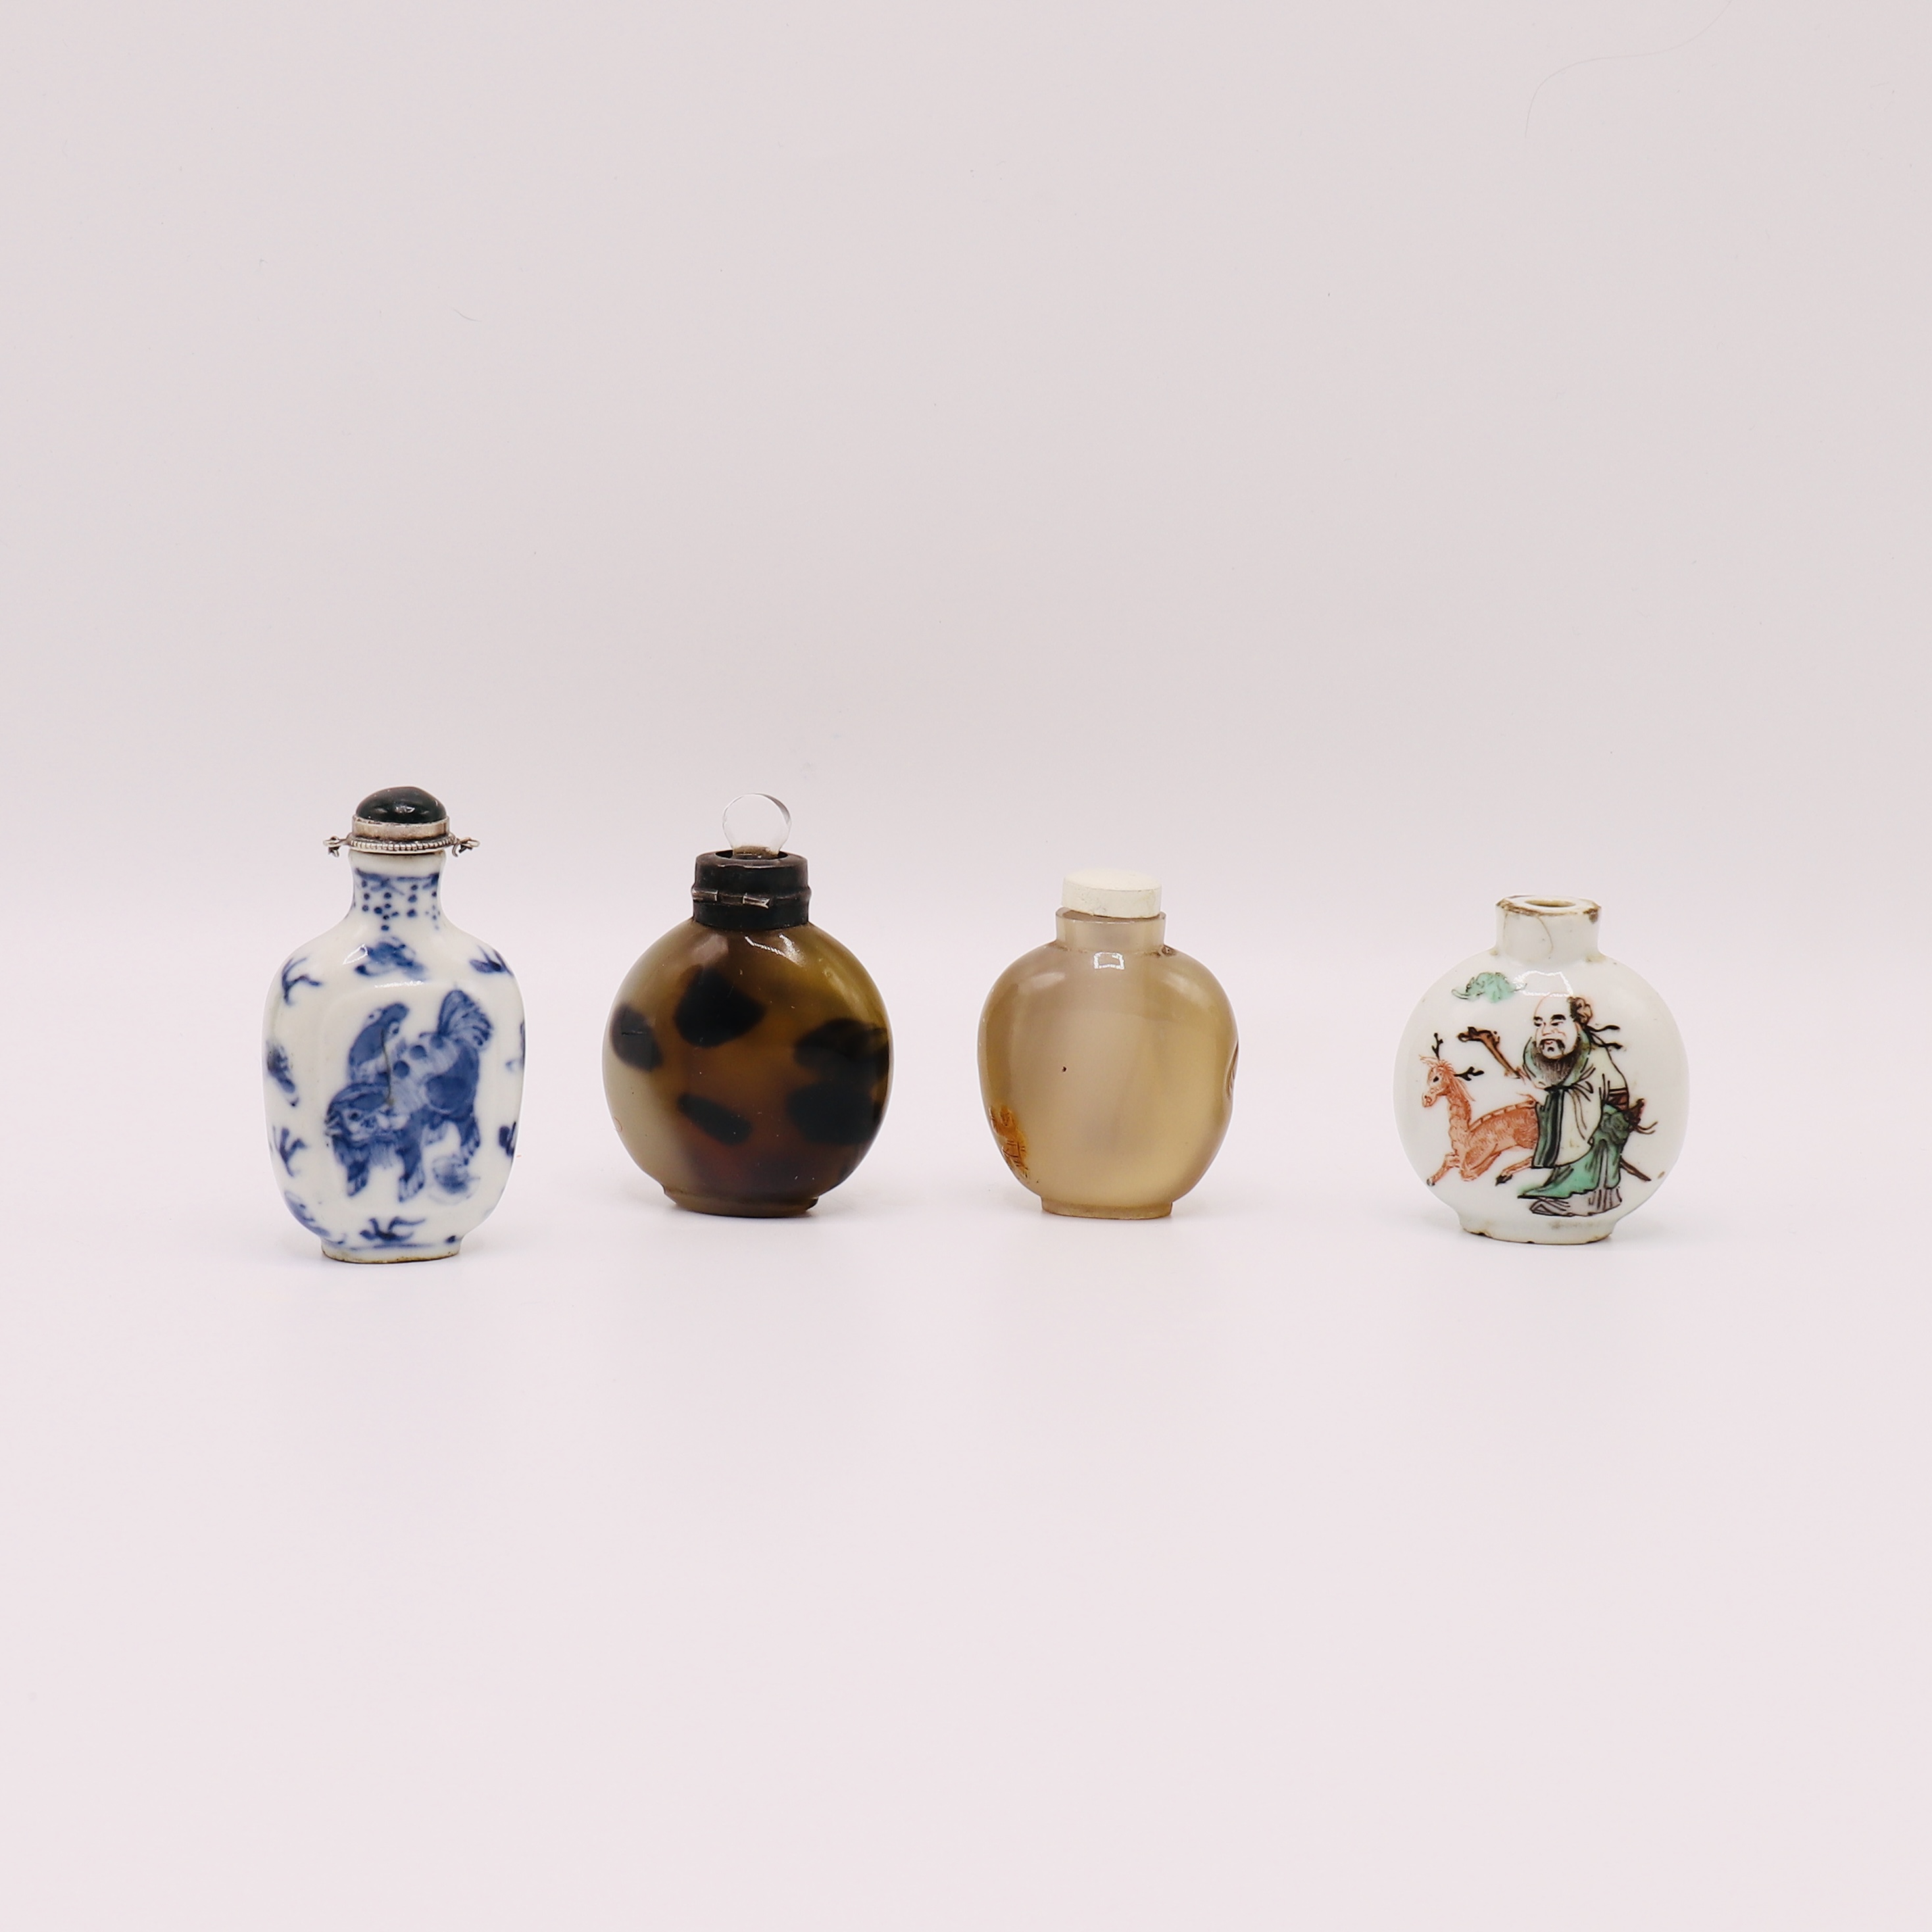 ASSORTMENT OF CHINESE SNUFF BOTTLES, QING DYNASTY (1644-1911) - Image 3 of 5